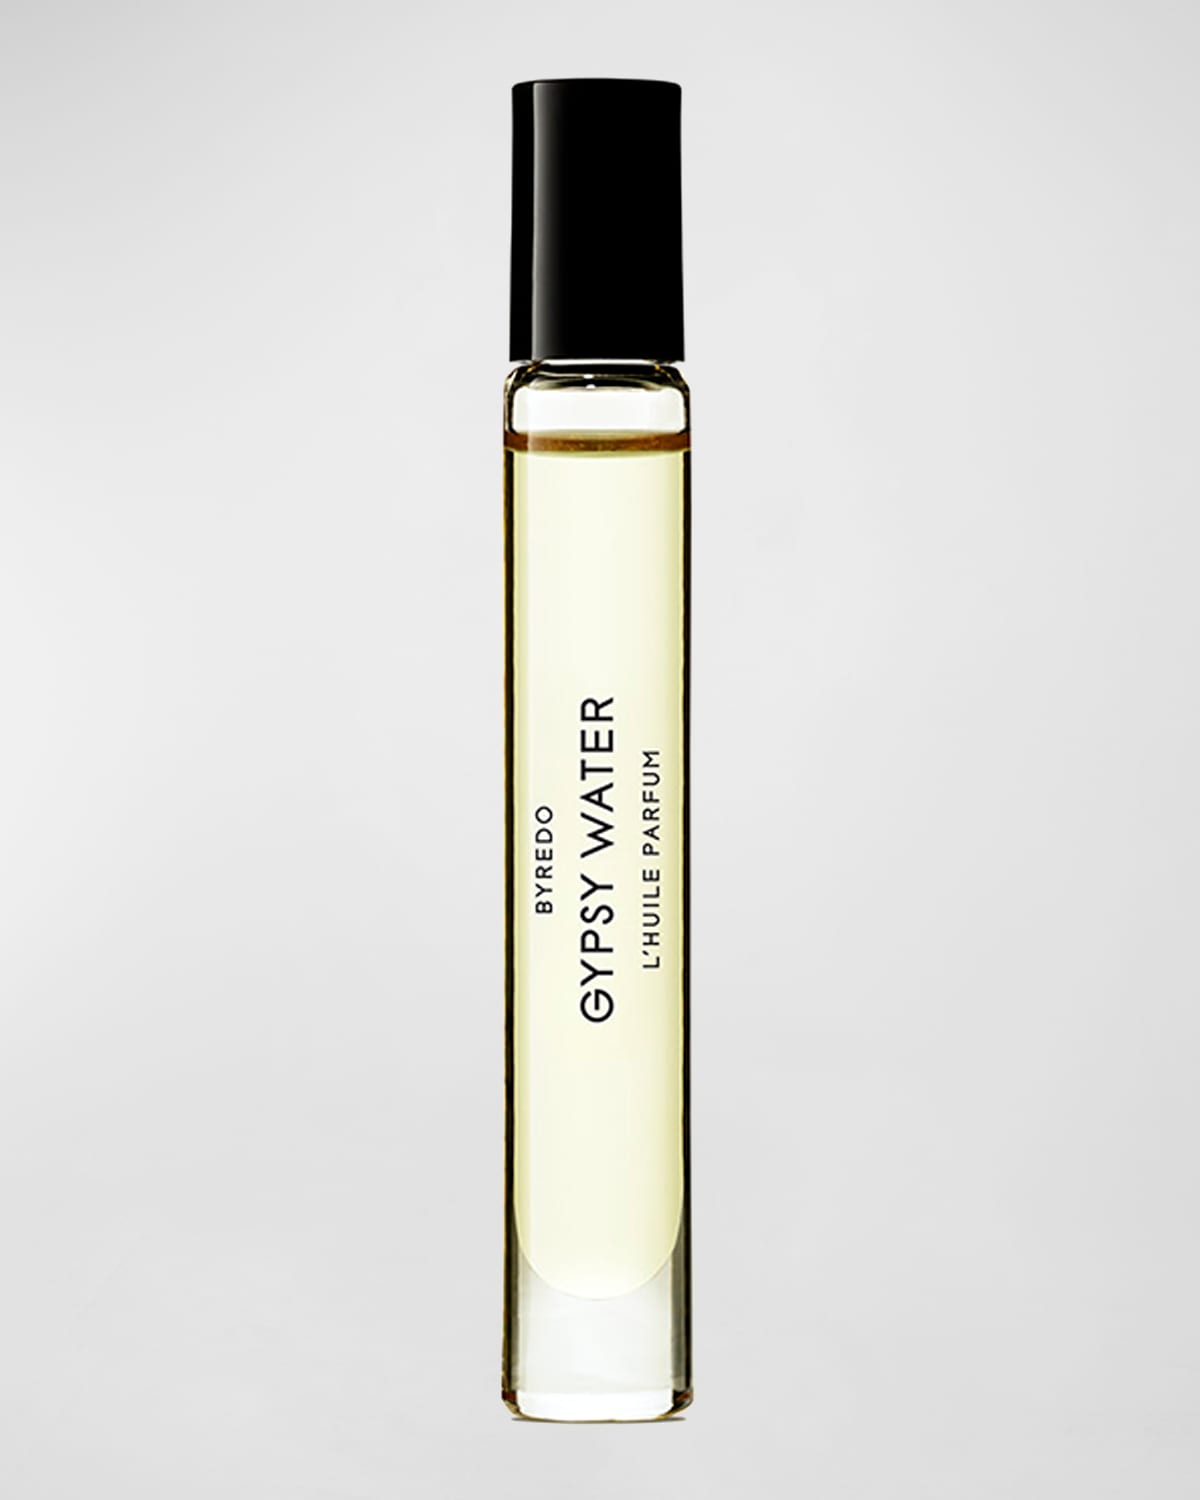 Gypsy Water L'Huile Parfum Oil Roll-On, 0.25 oz.